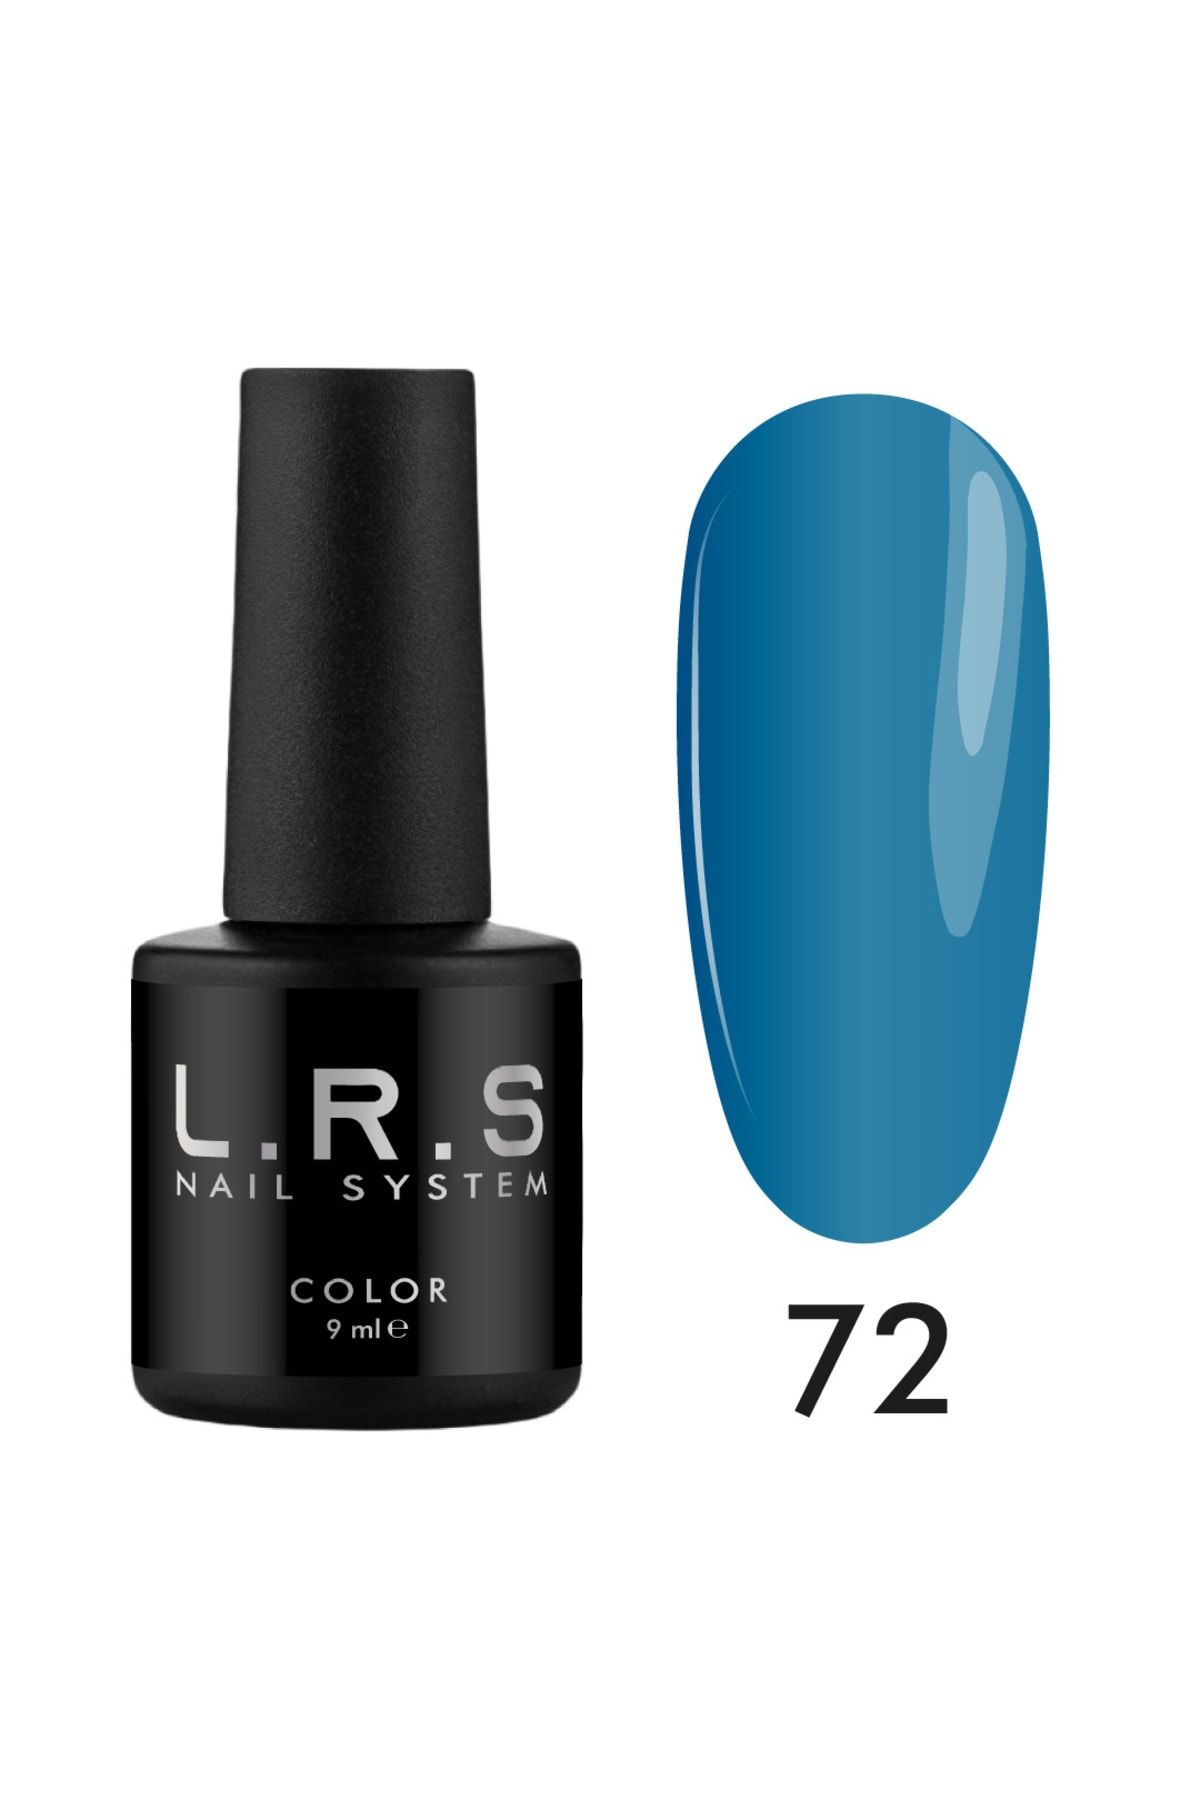 PNB Lrs Nail System 9ml Color 72